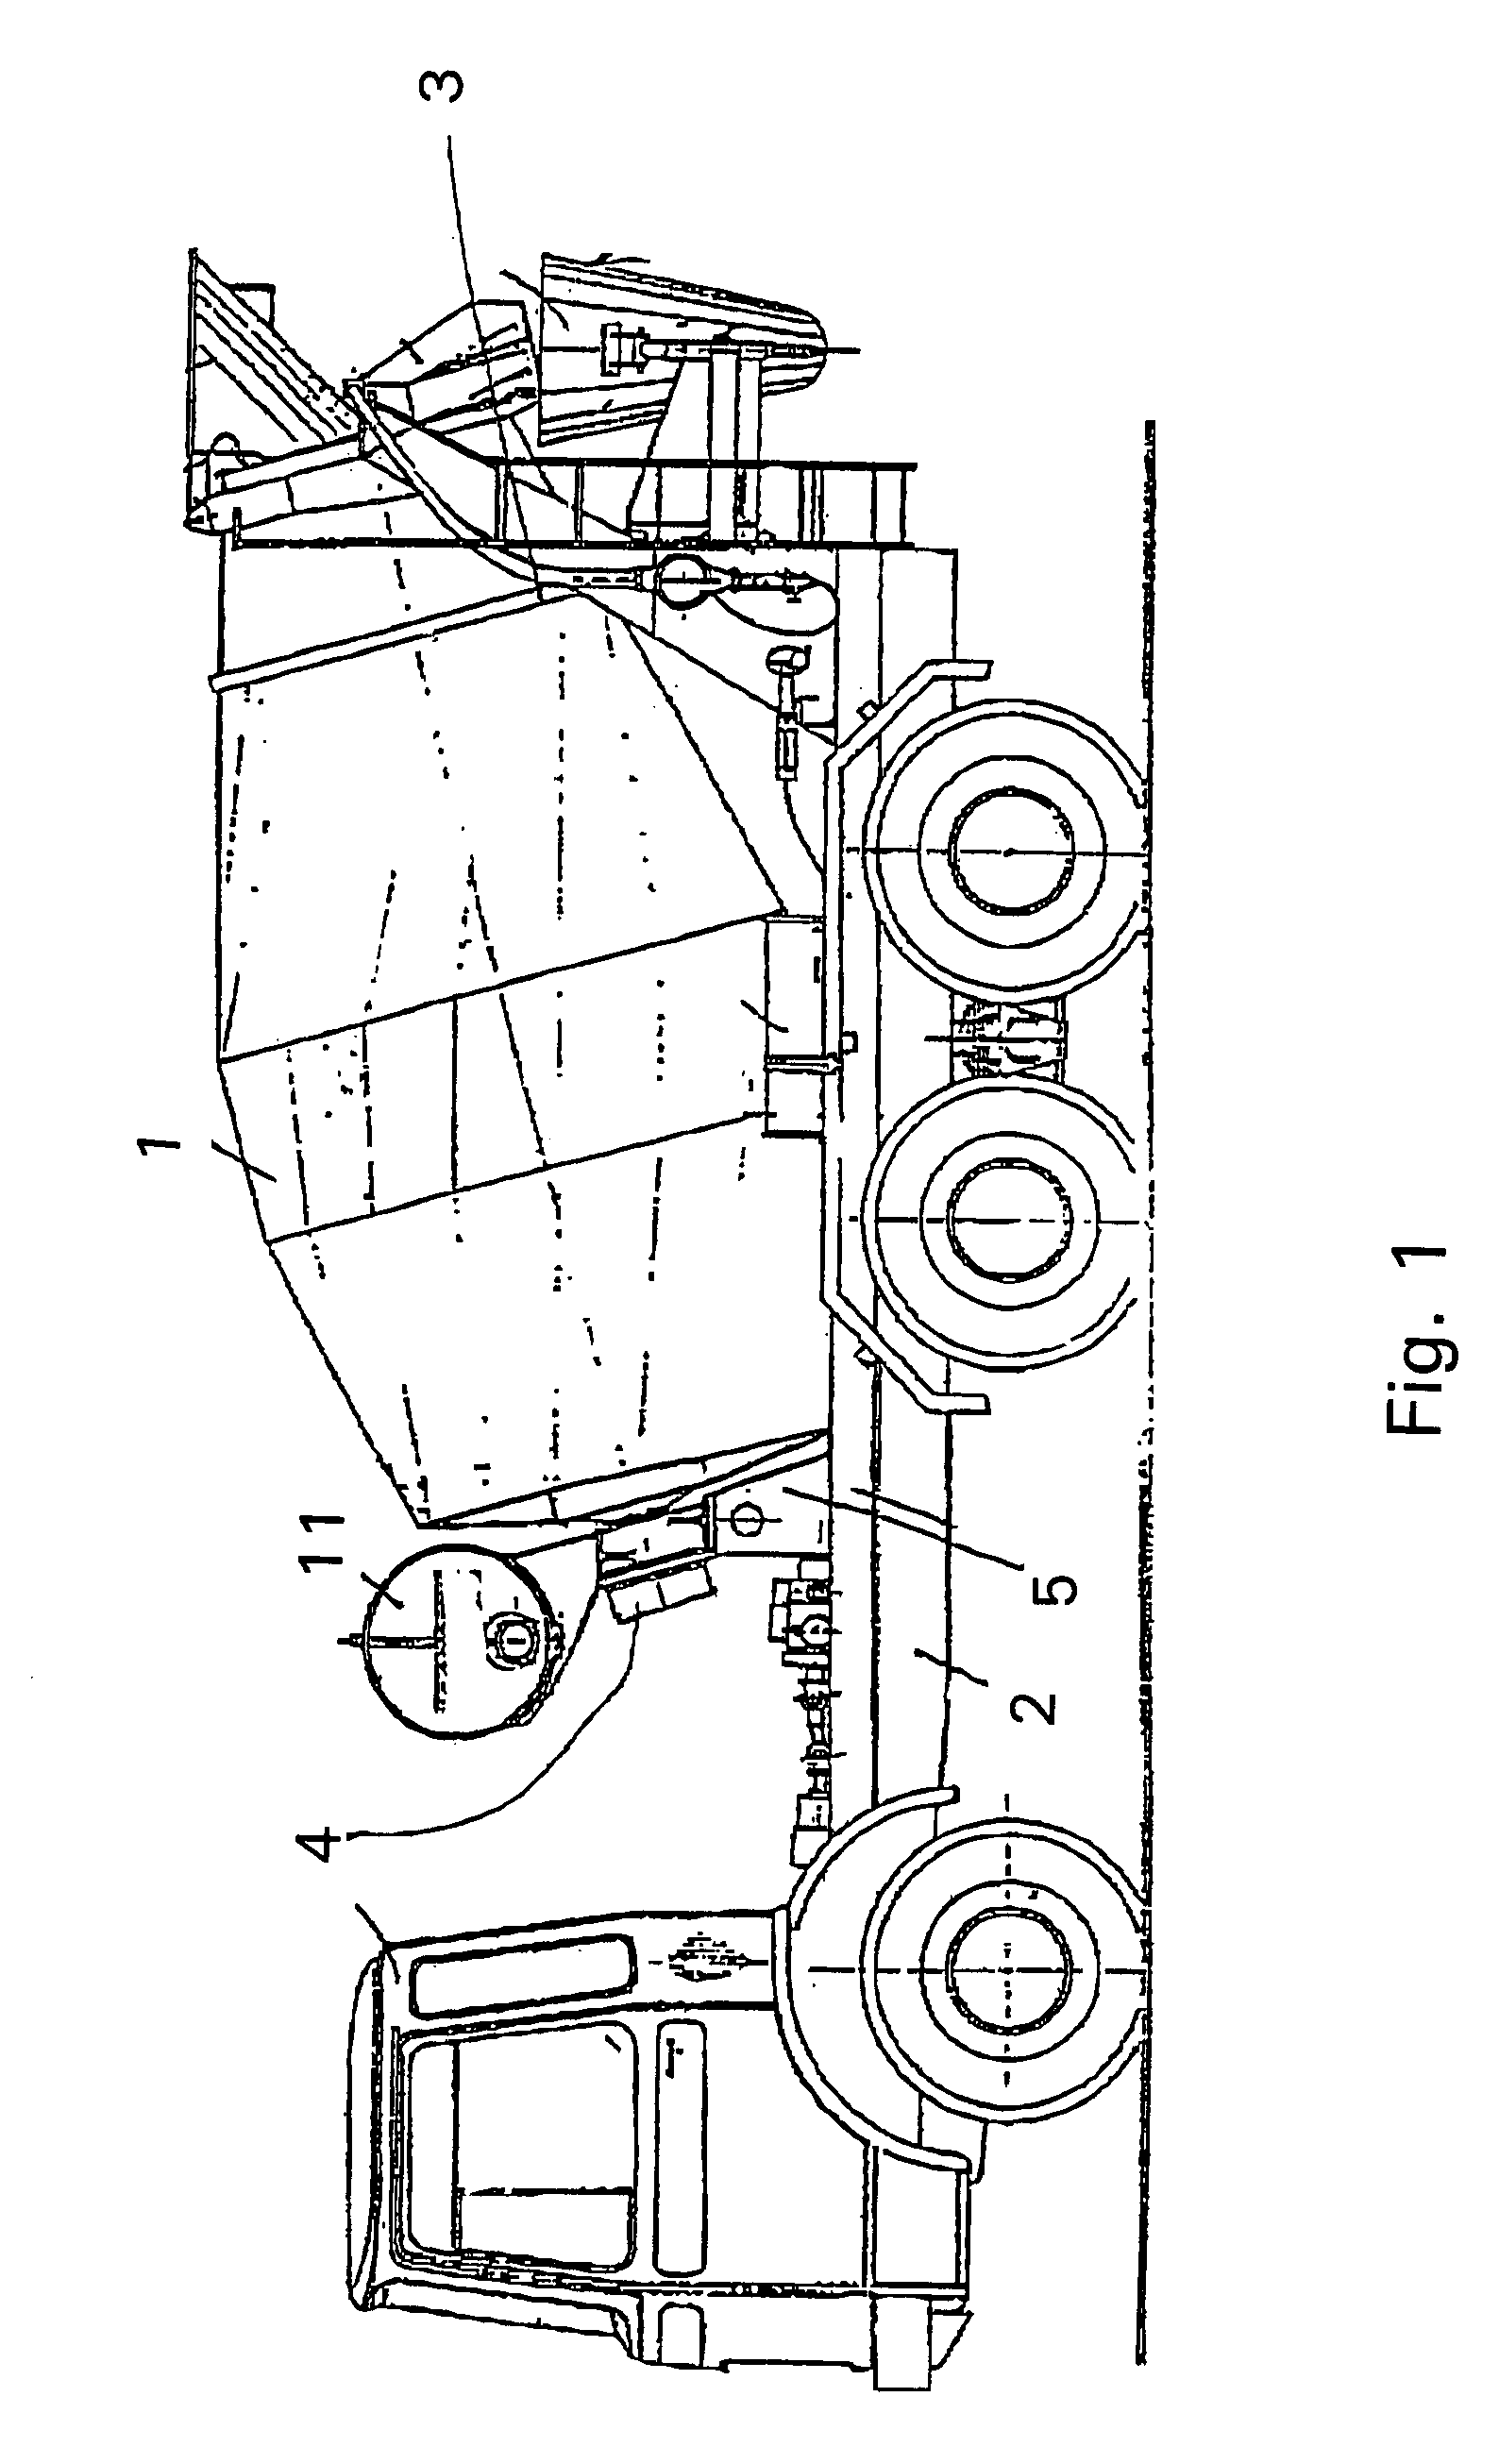 Drive for mixing drum with elastic element arranged between bearing incorporating drive system and base